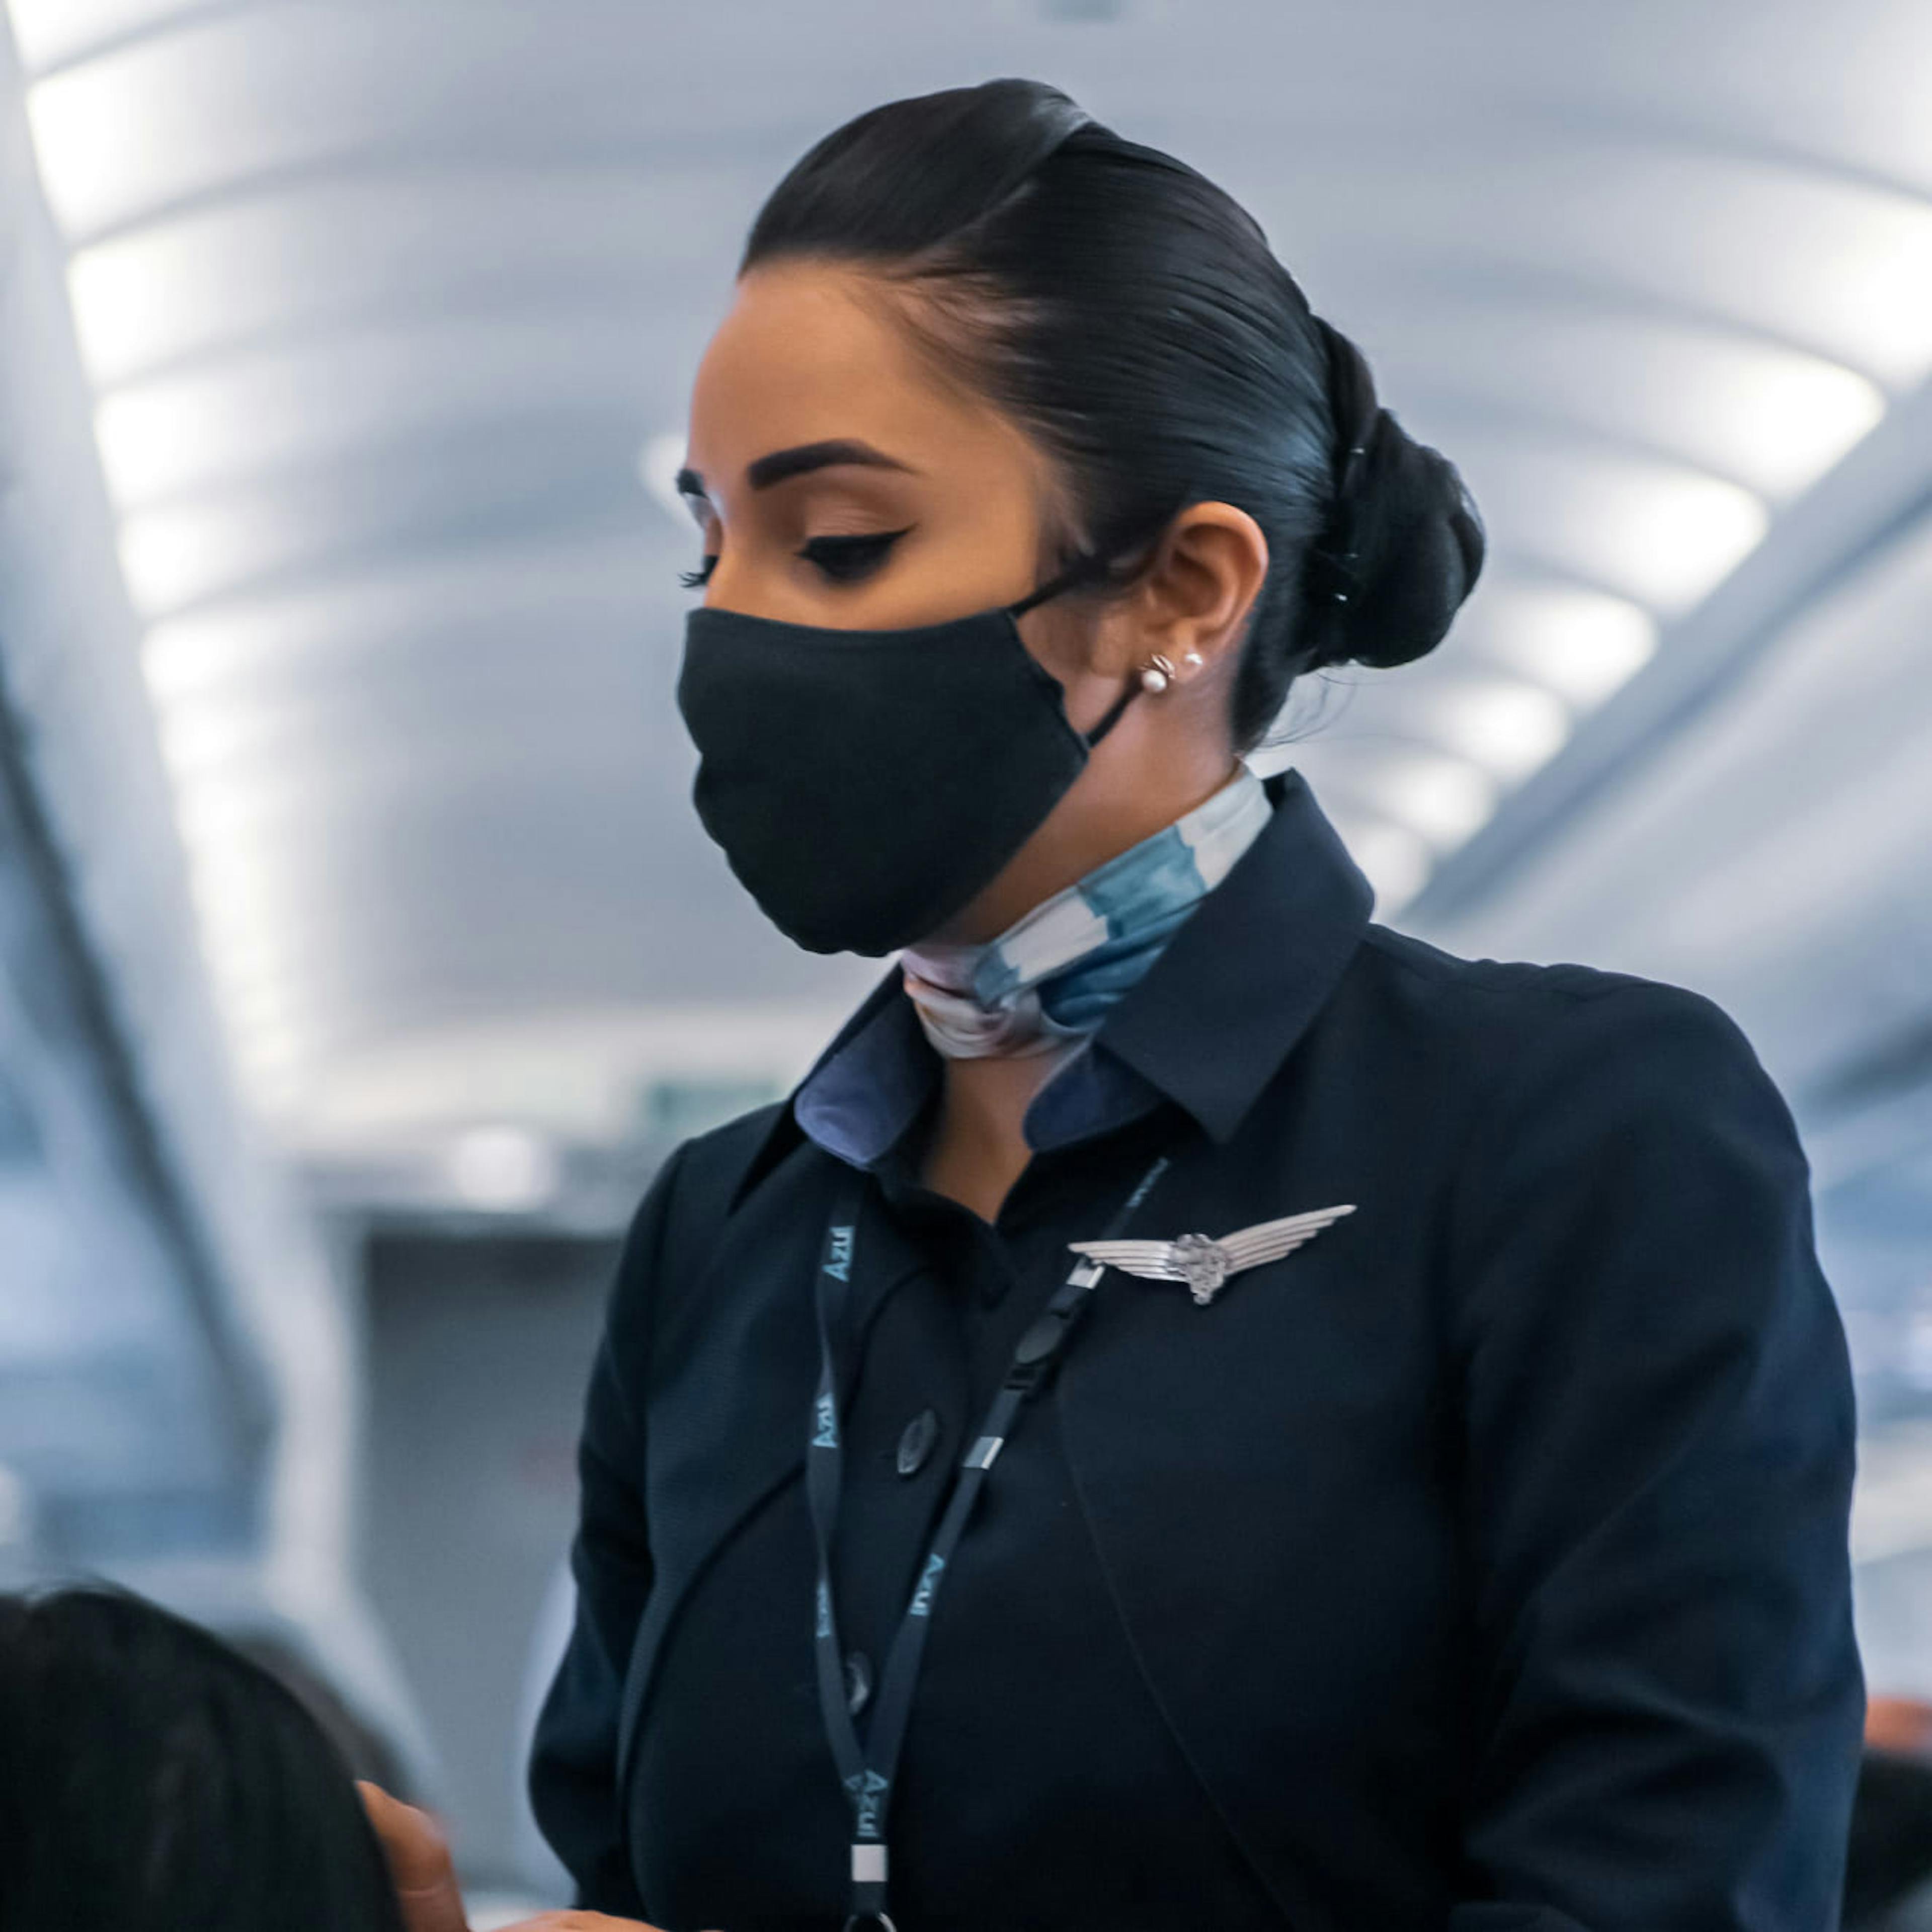 A flight attendant gently reminding a passenger to wear a face mask on the plane during the pandemic.